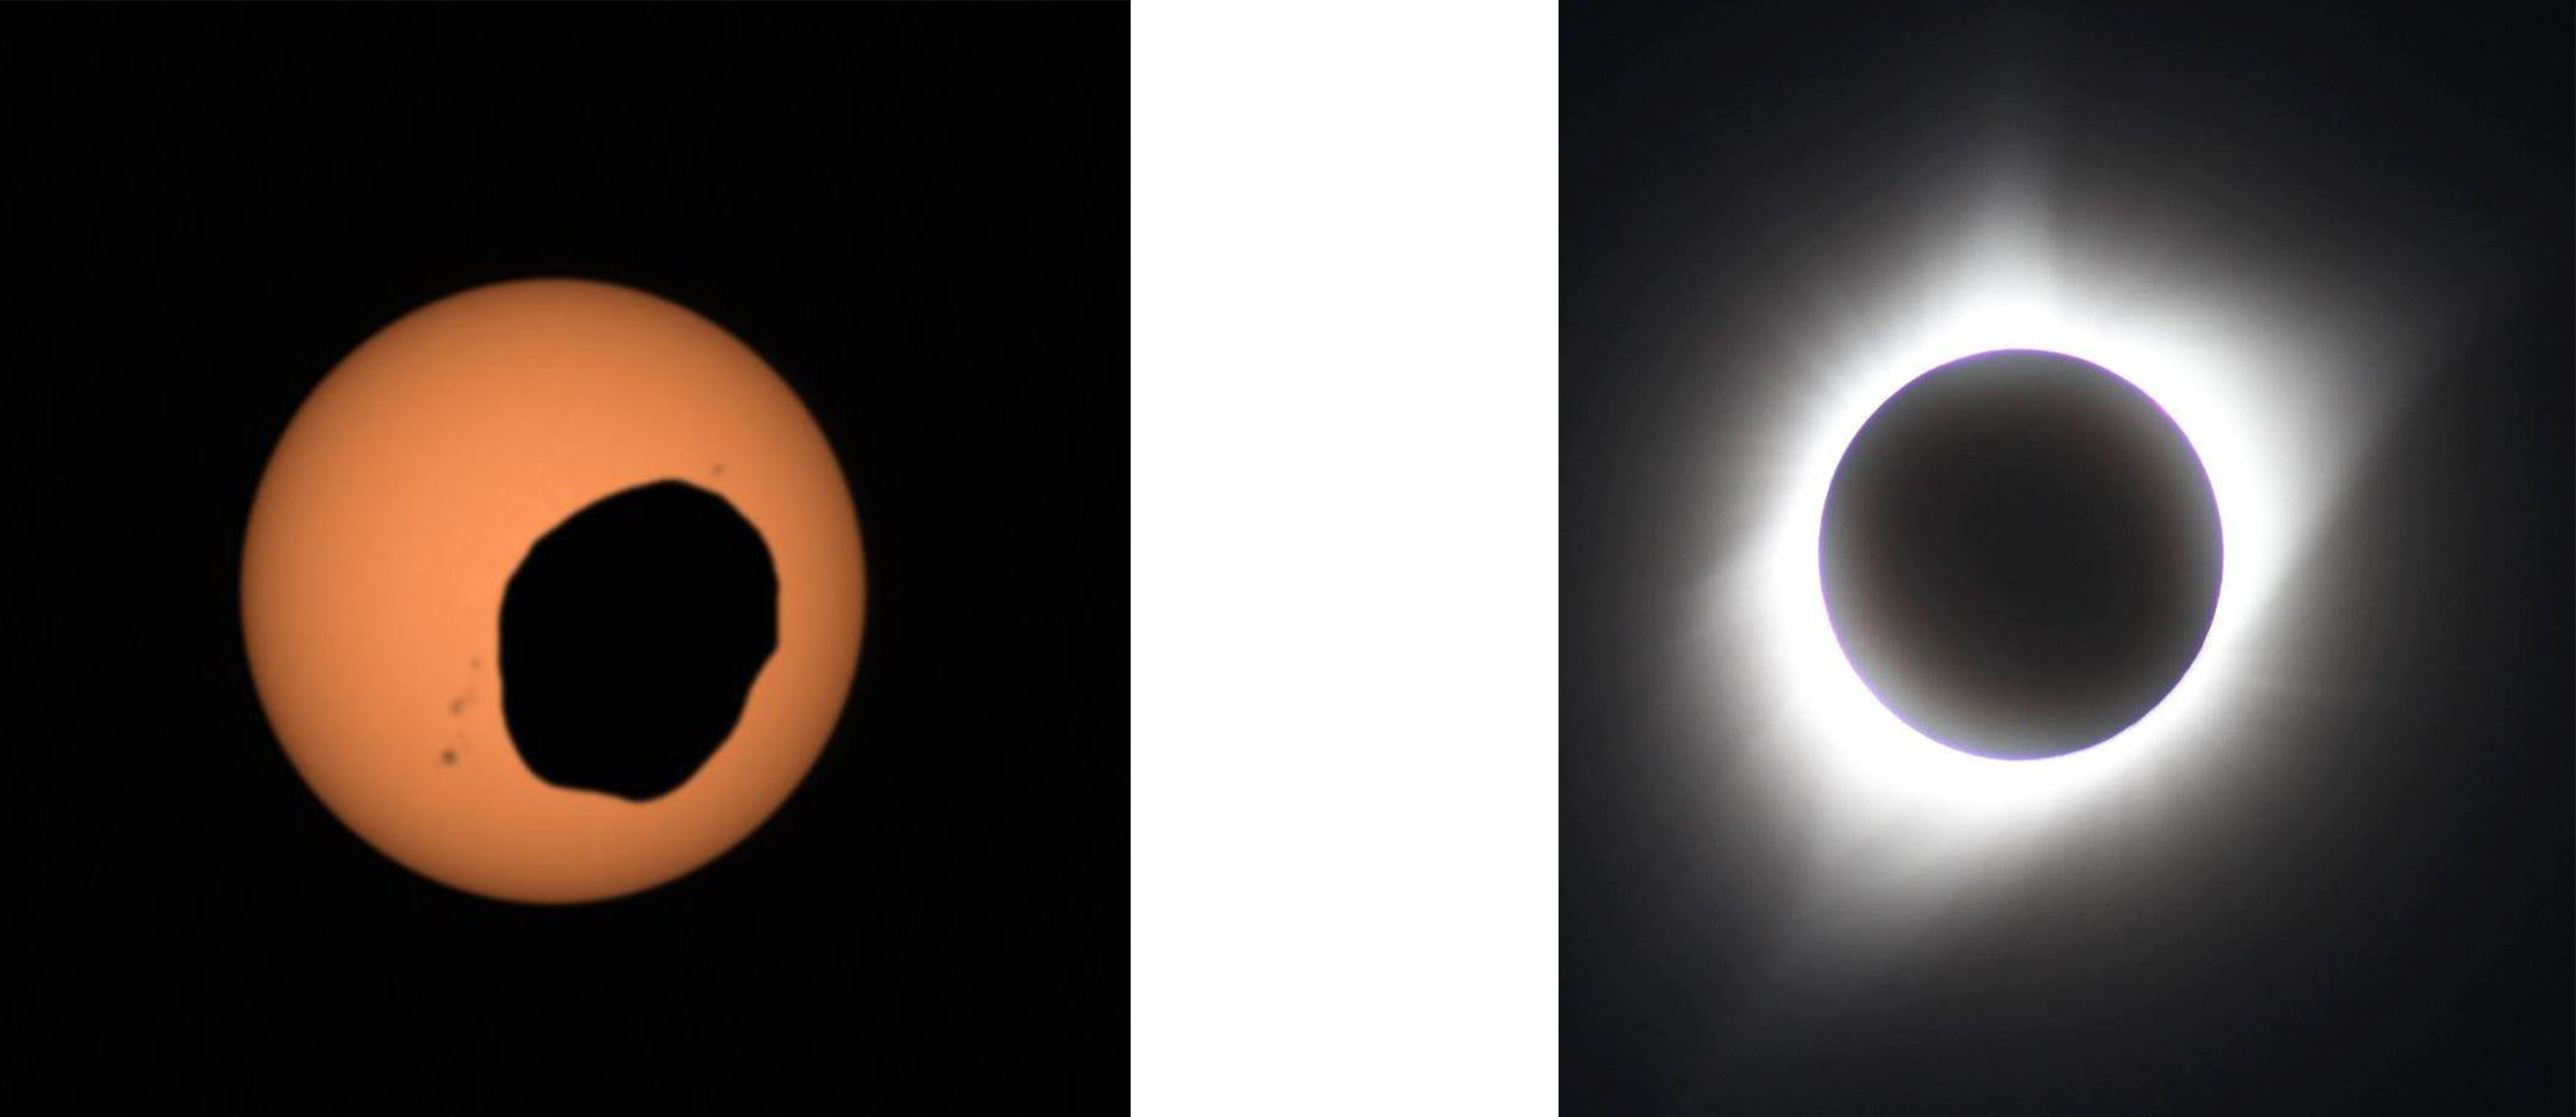 A potato-shaped moon of Mars passes in front of the Sun, causing an eclipse (left)   A hazy white corona surrounds the black disk of the totally eclipsed Sun (right).